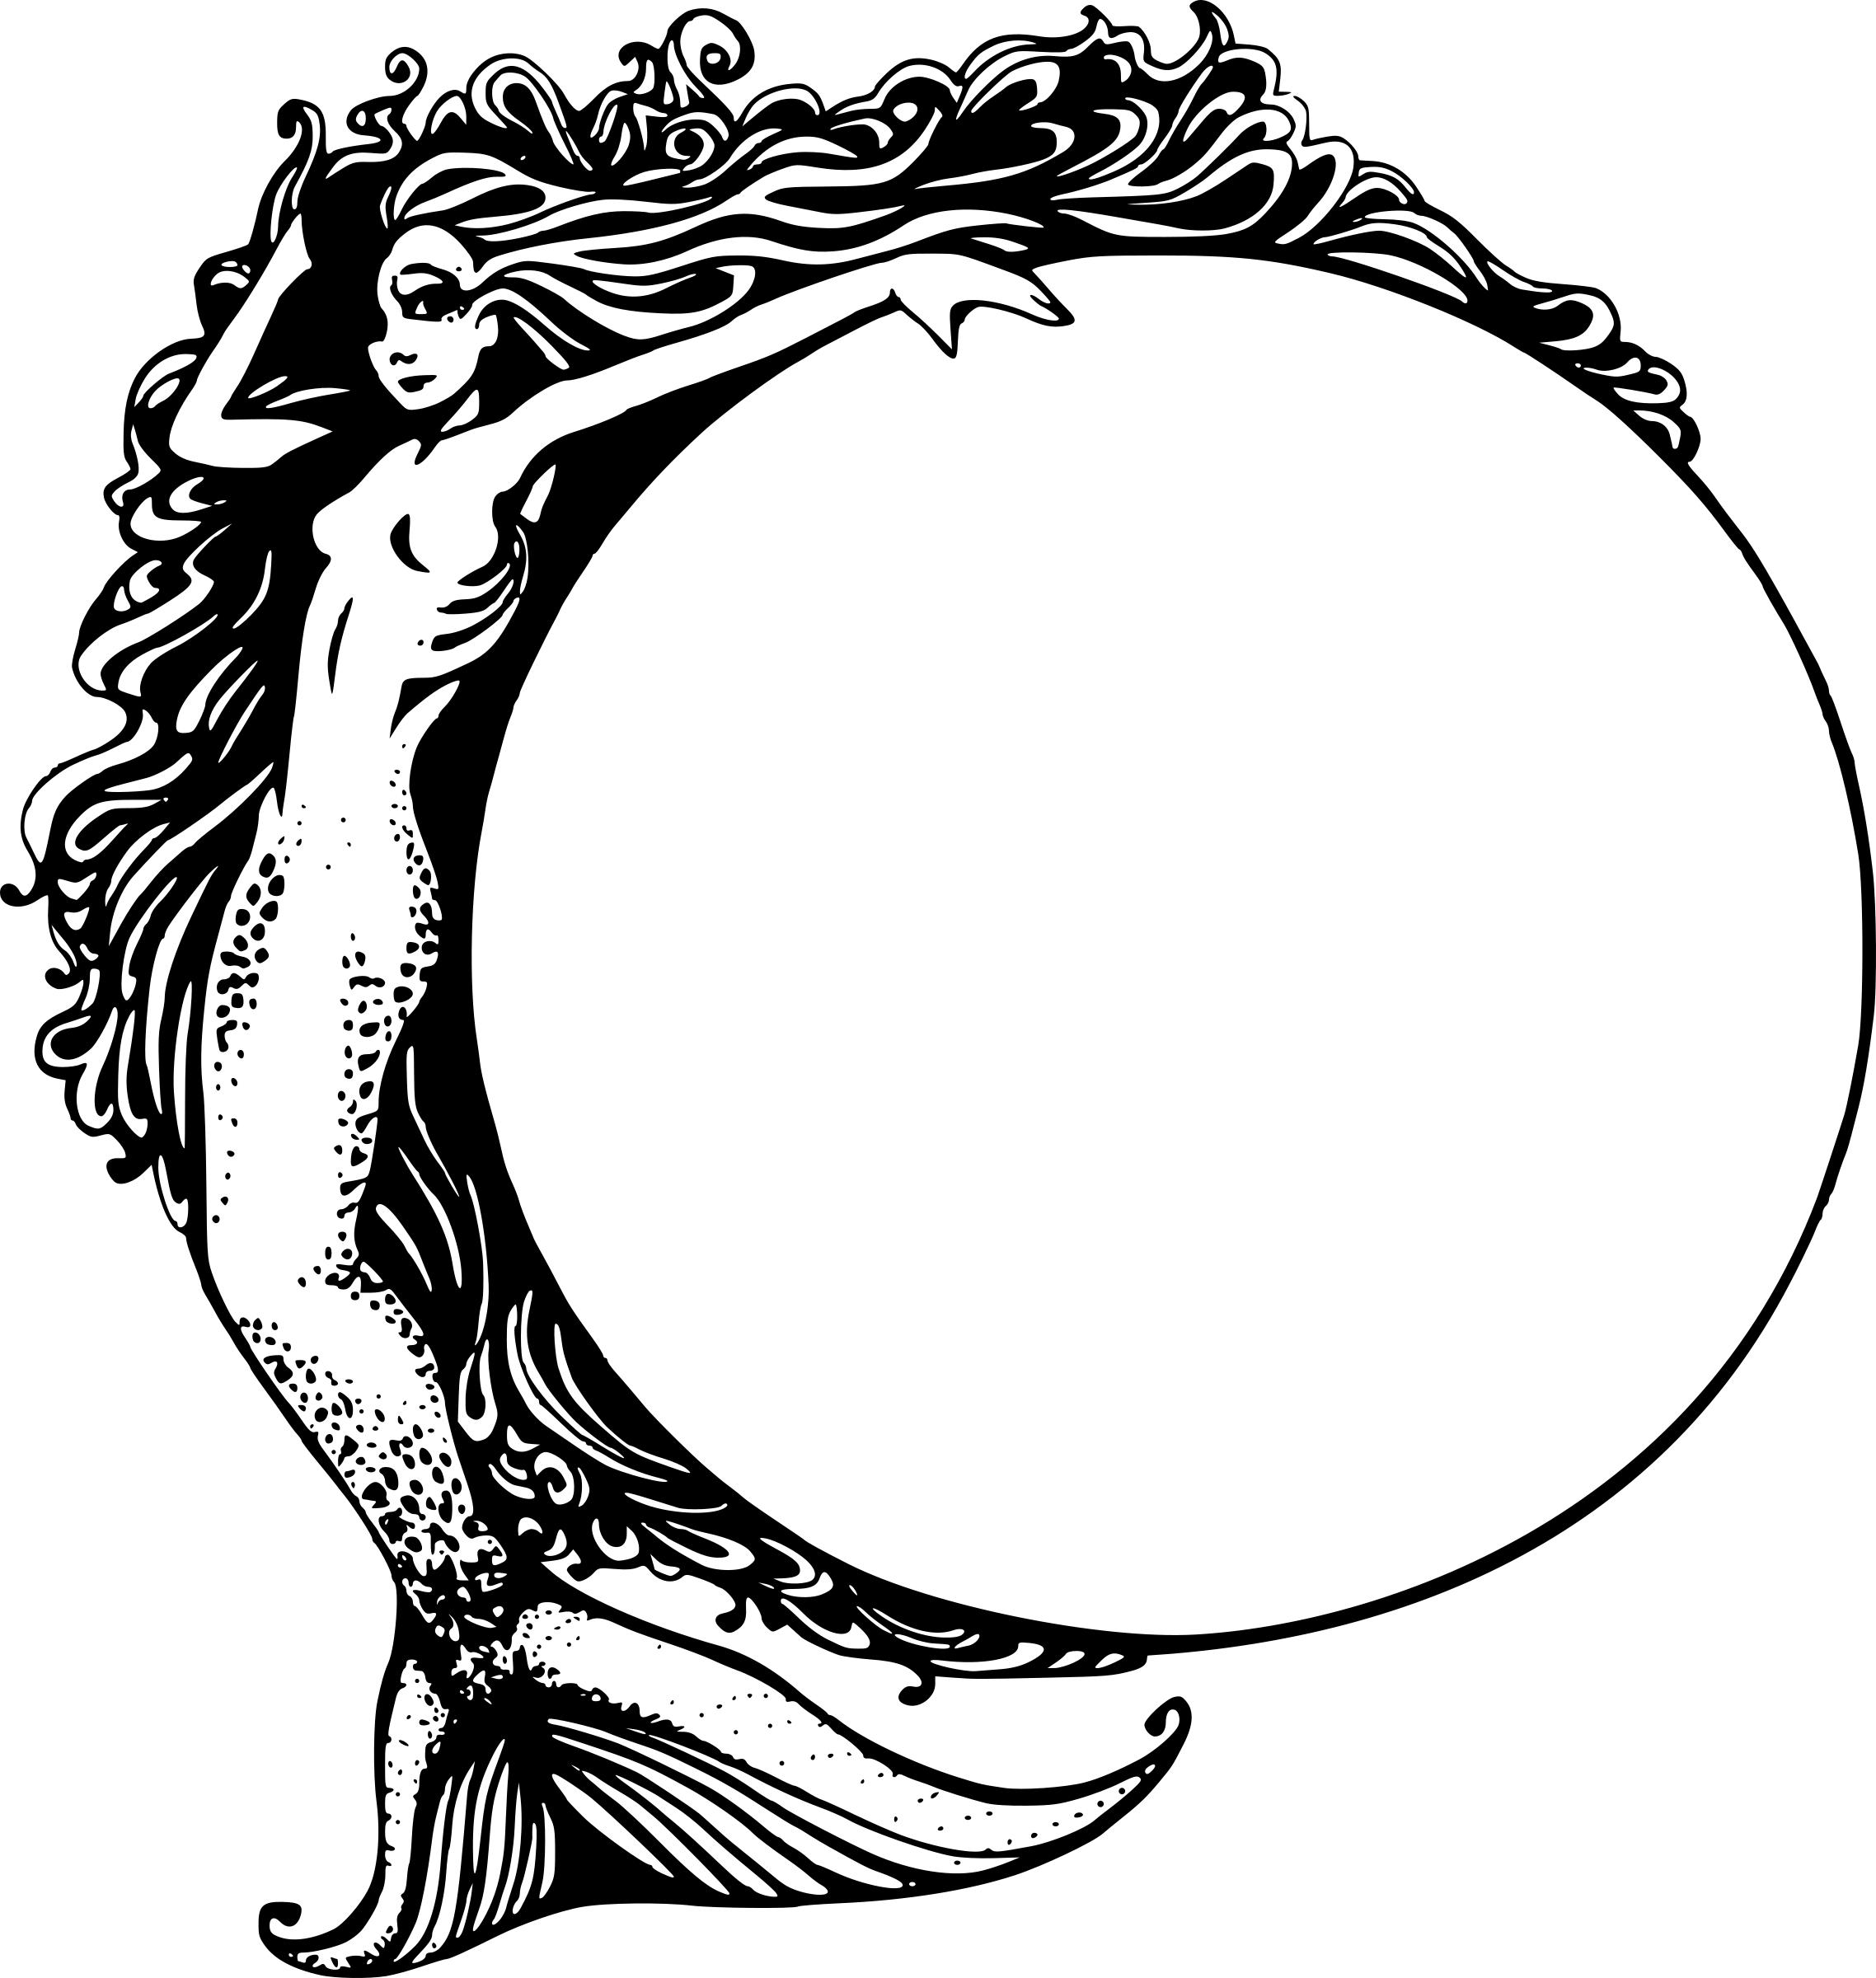 Mermaid with a circle png